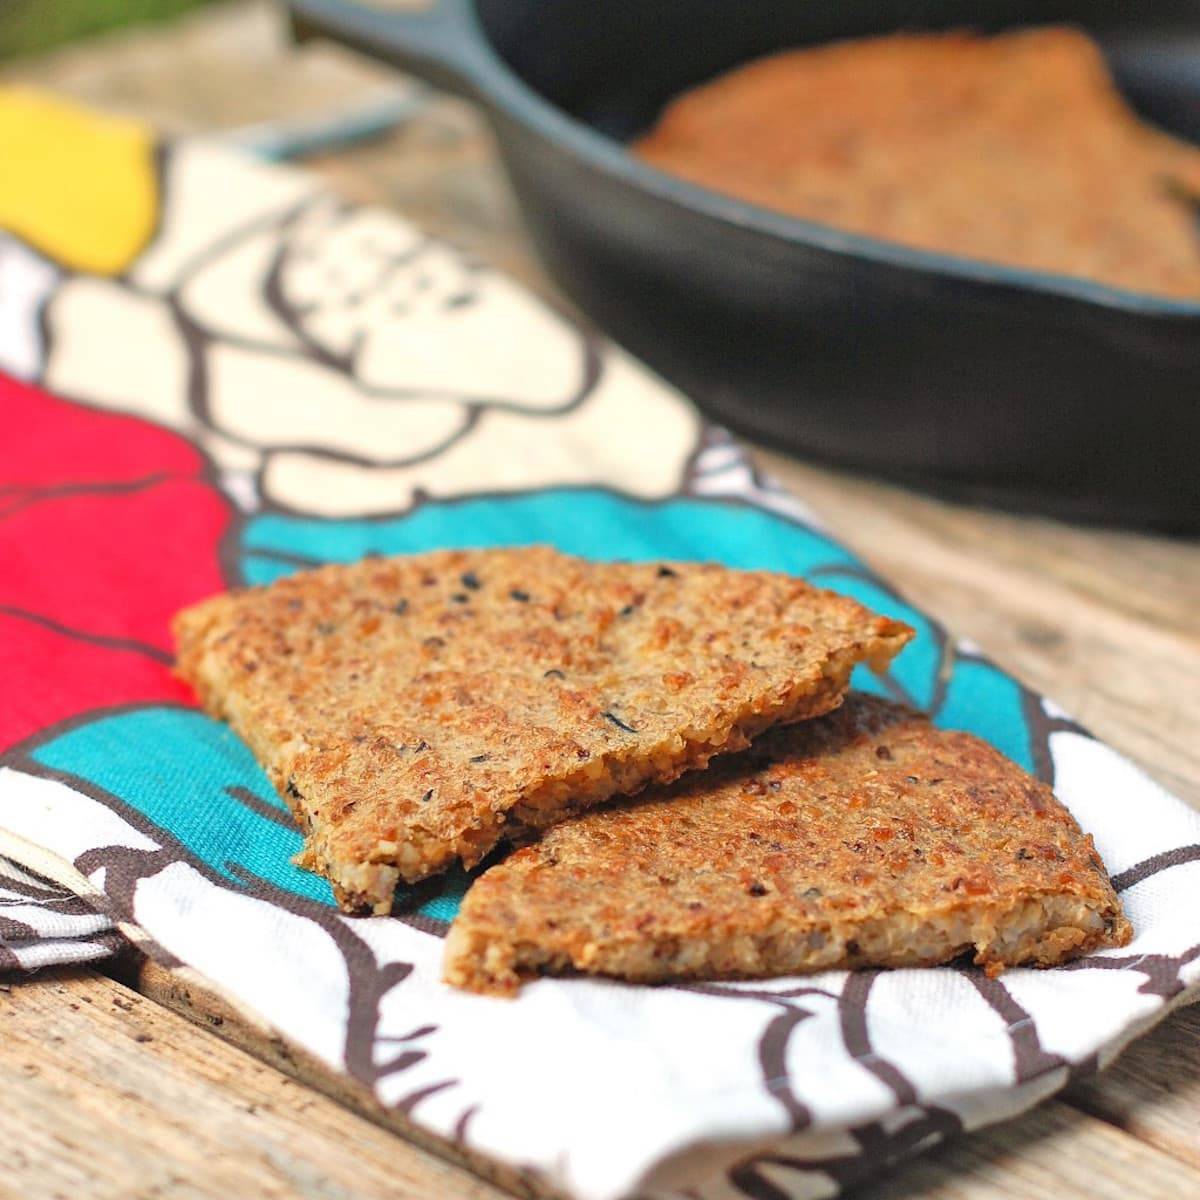 Wild rice flatbread on a colorful piece of fabric.